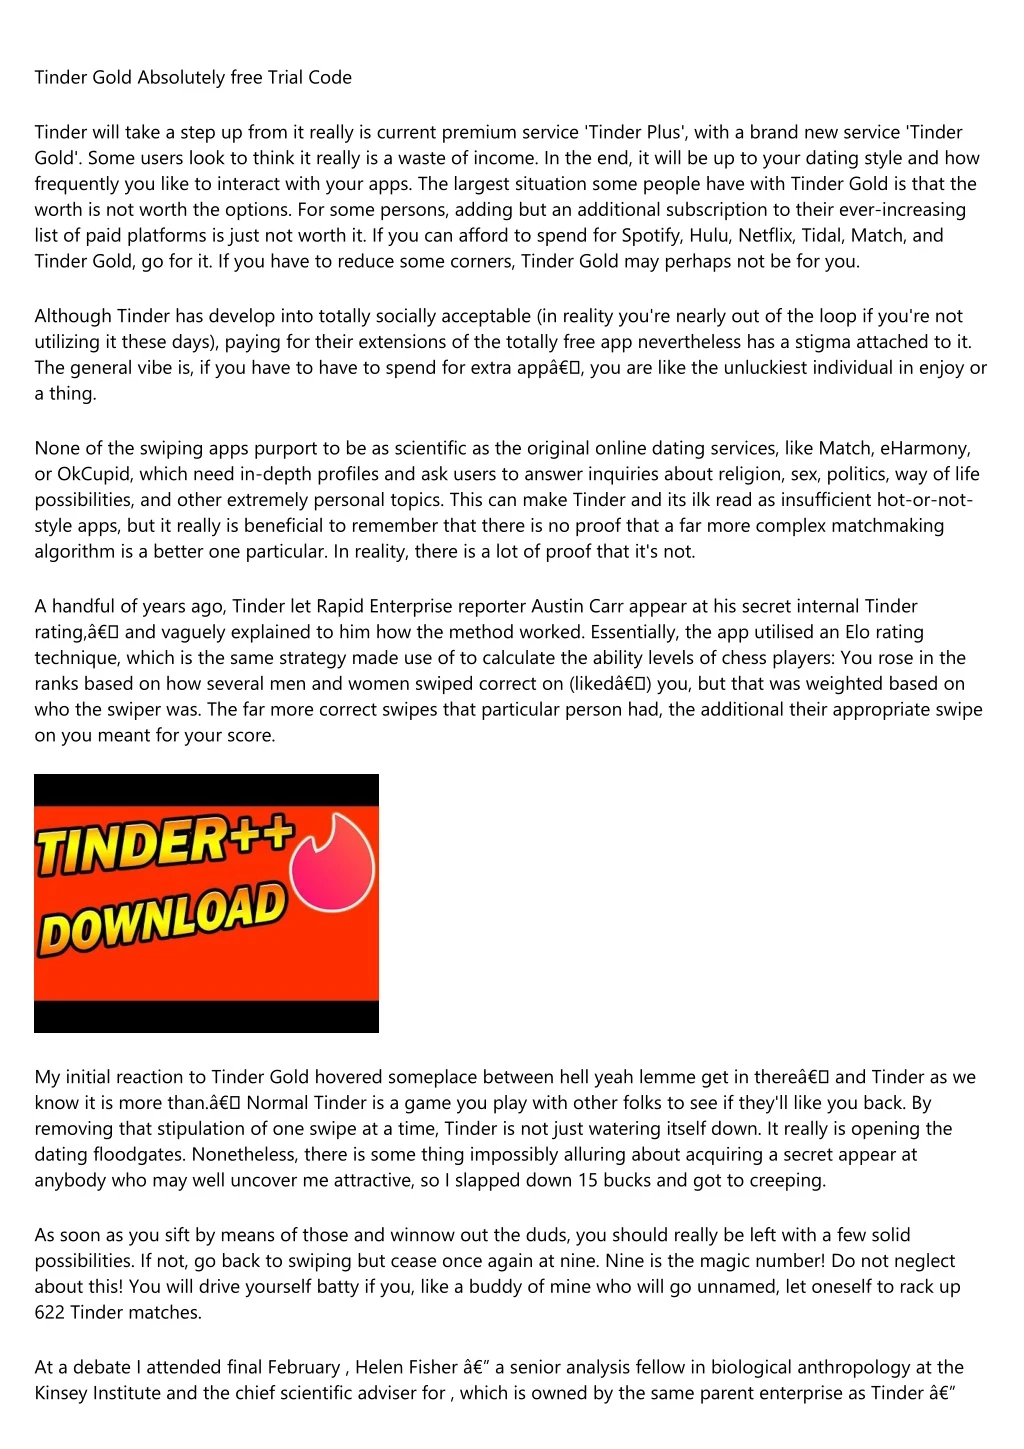 tinder gold absolutely free trial code